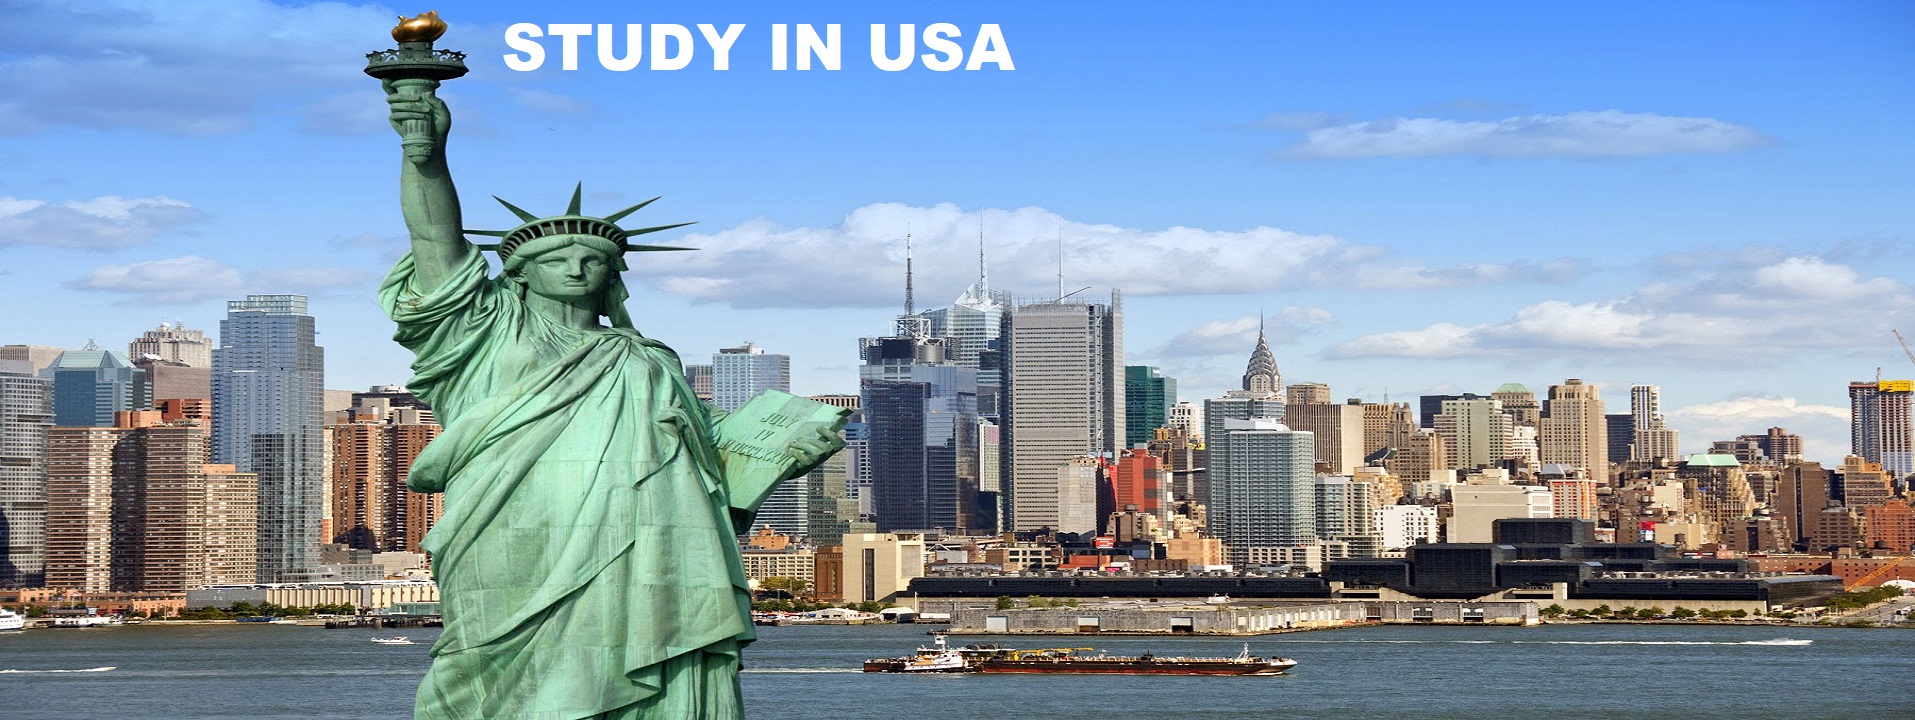 Study in the United States of America | Study in USA for Indian Students | study in usa with scholarship | study in usa cost | study in usa from india